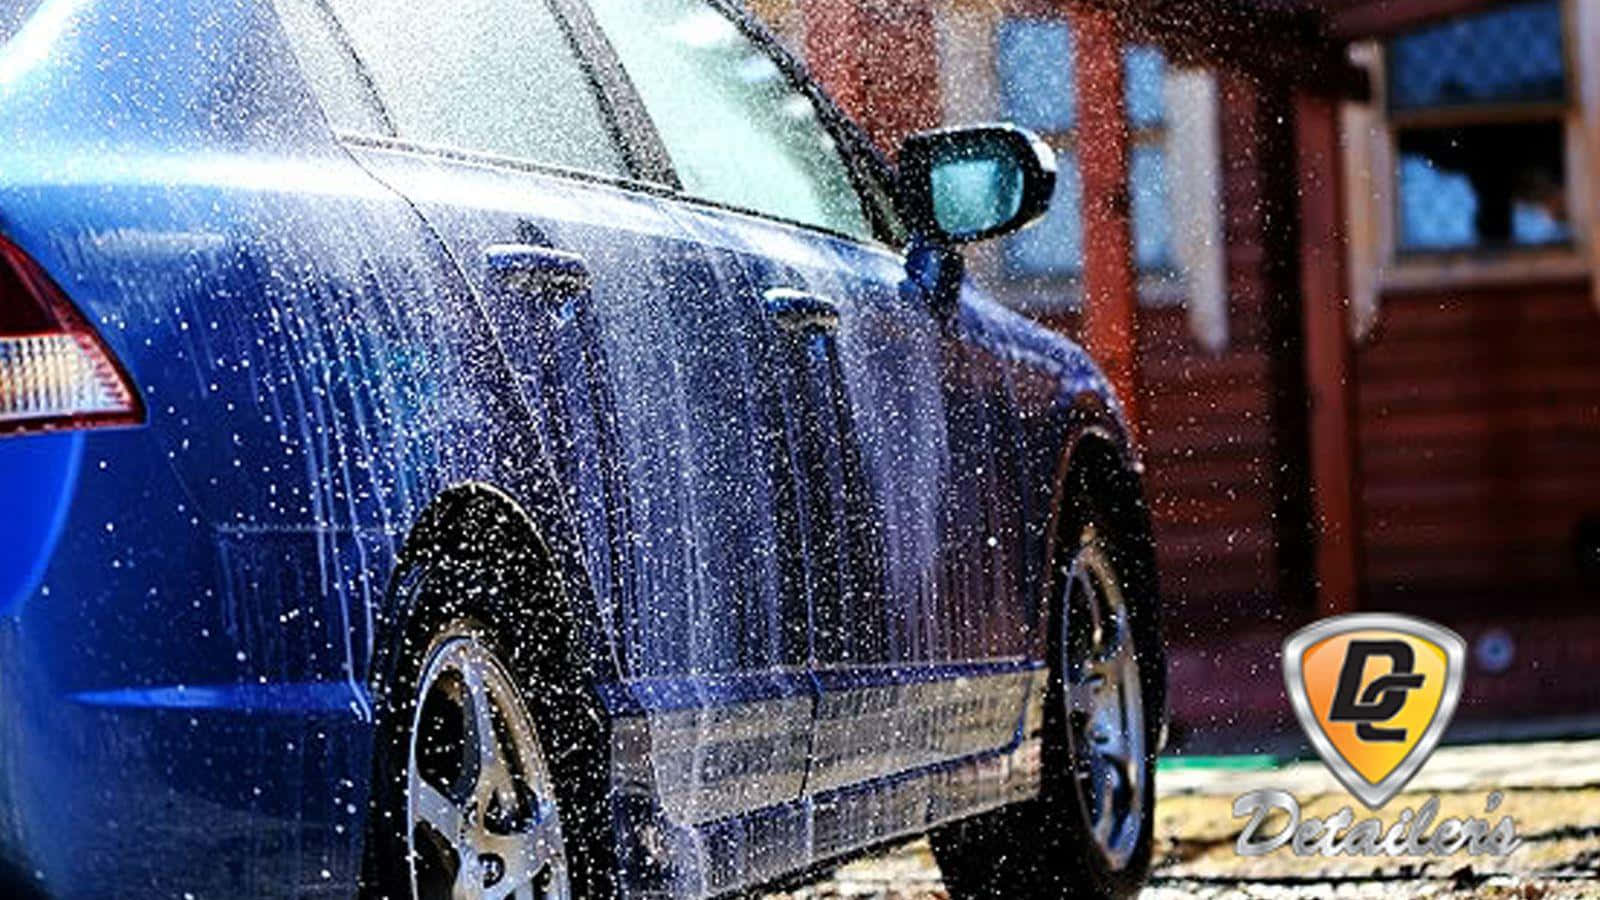 A Blue Car Is Being Washed With Water